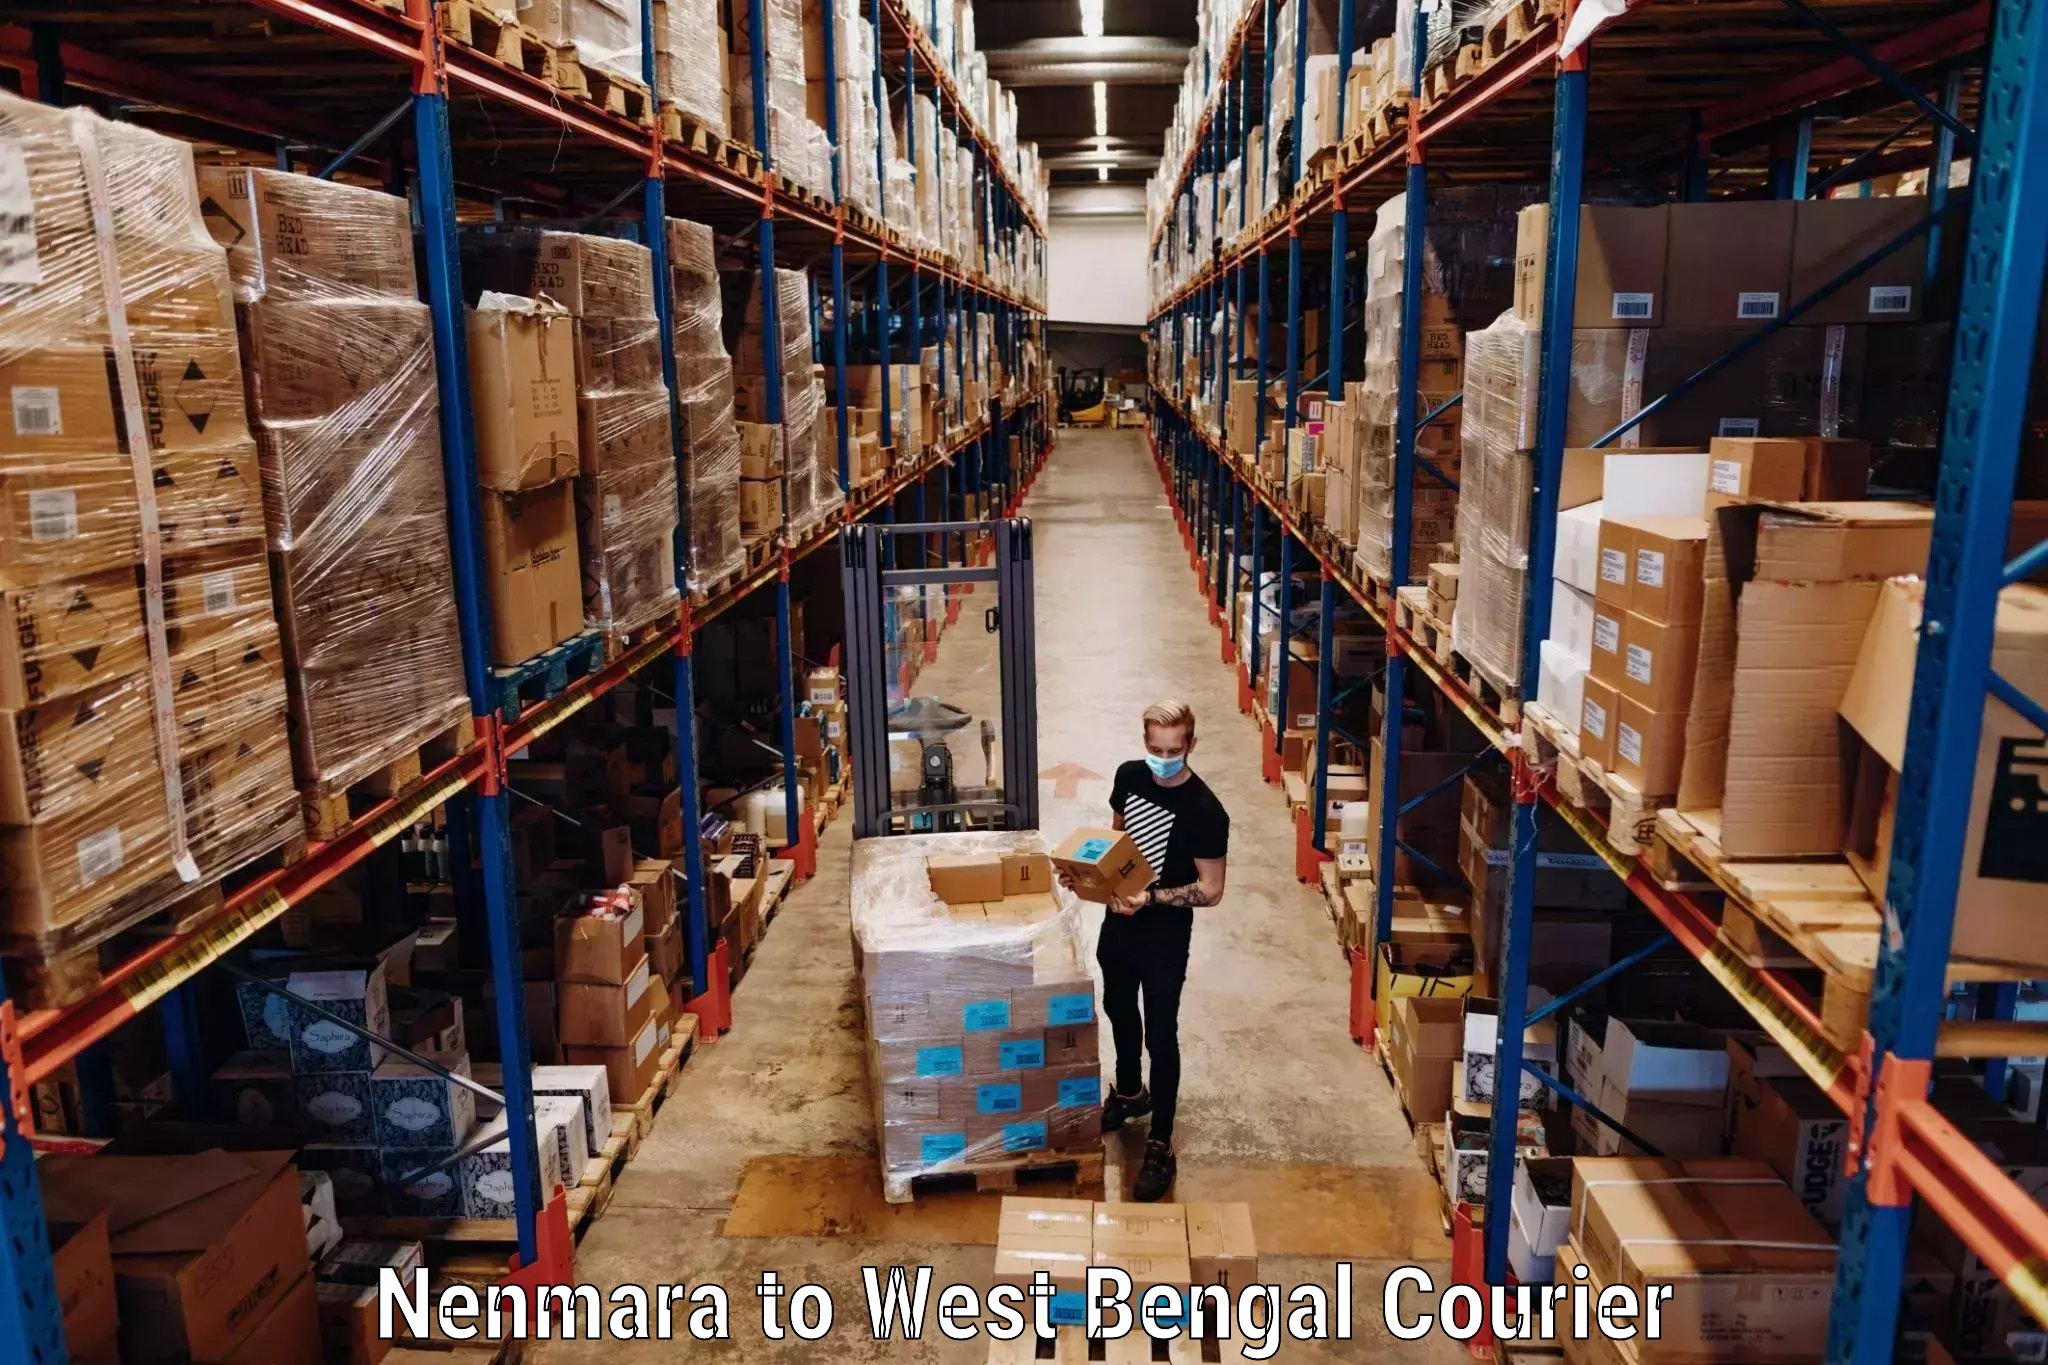 Baggage shipping experience Nenmara to West Bengal